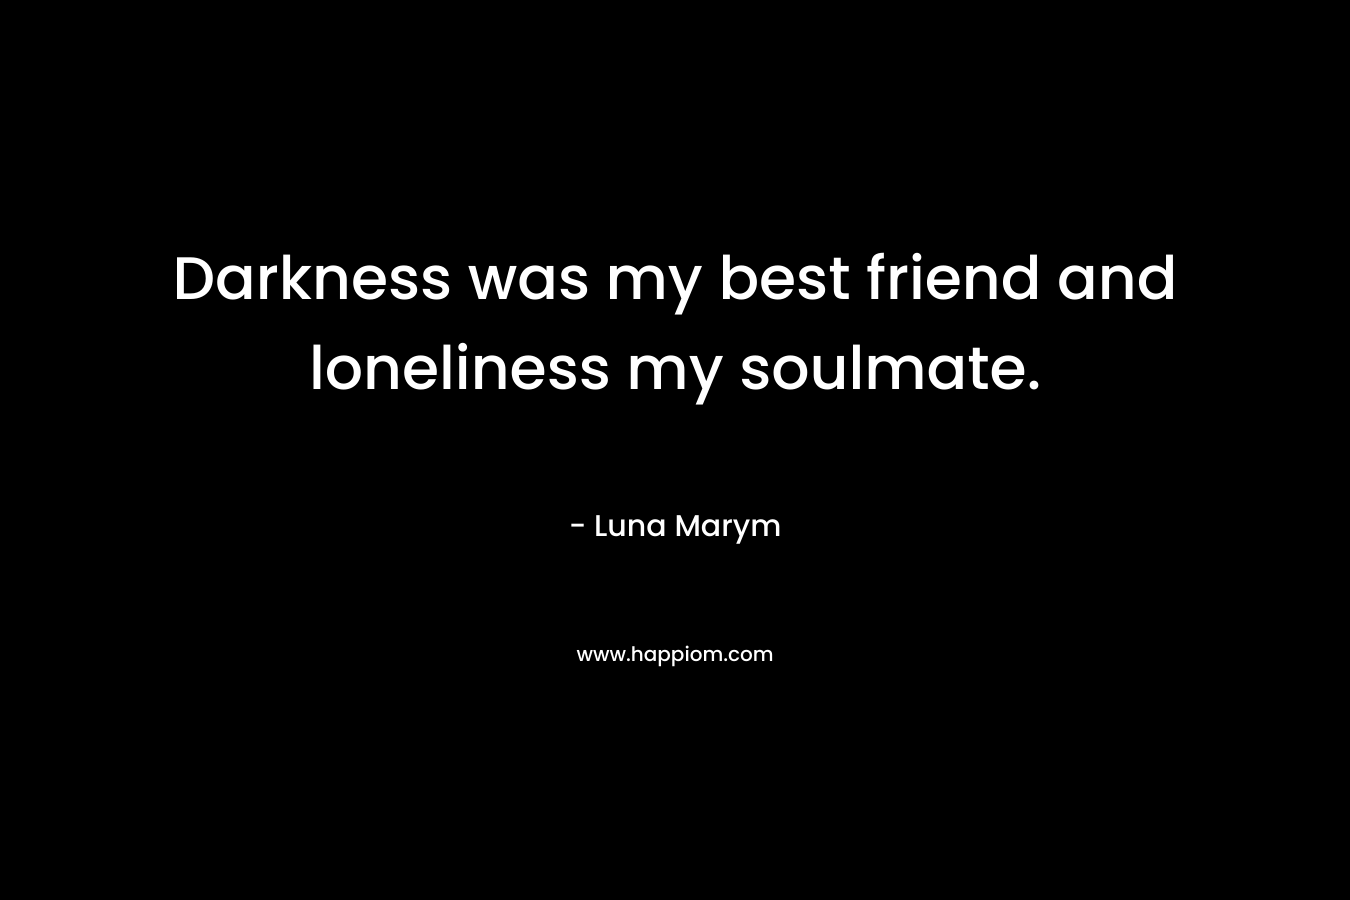 Darkness was my best friend and loneliness my soulmate.